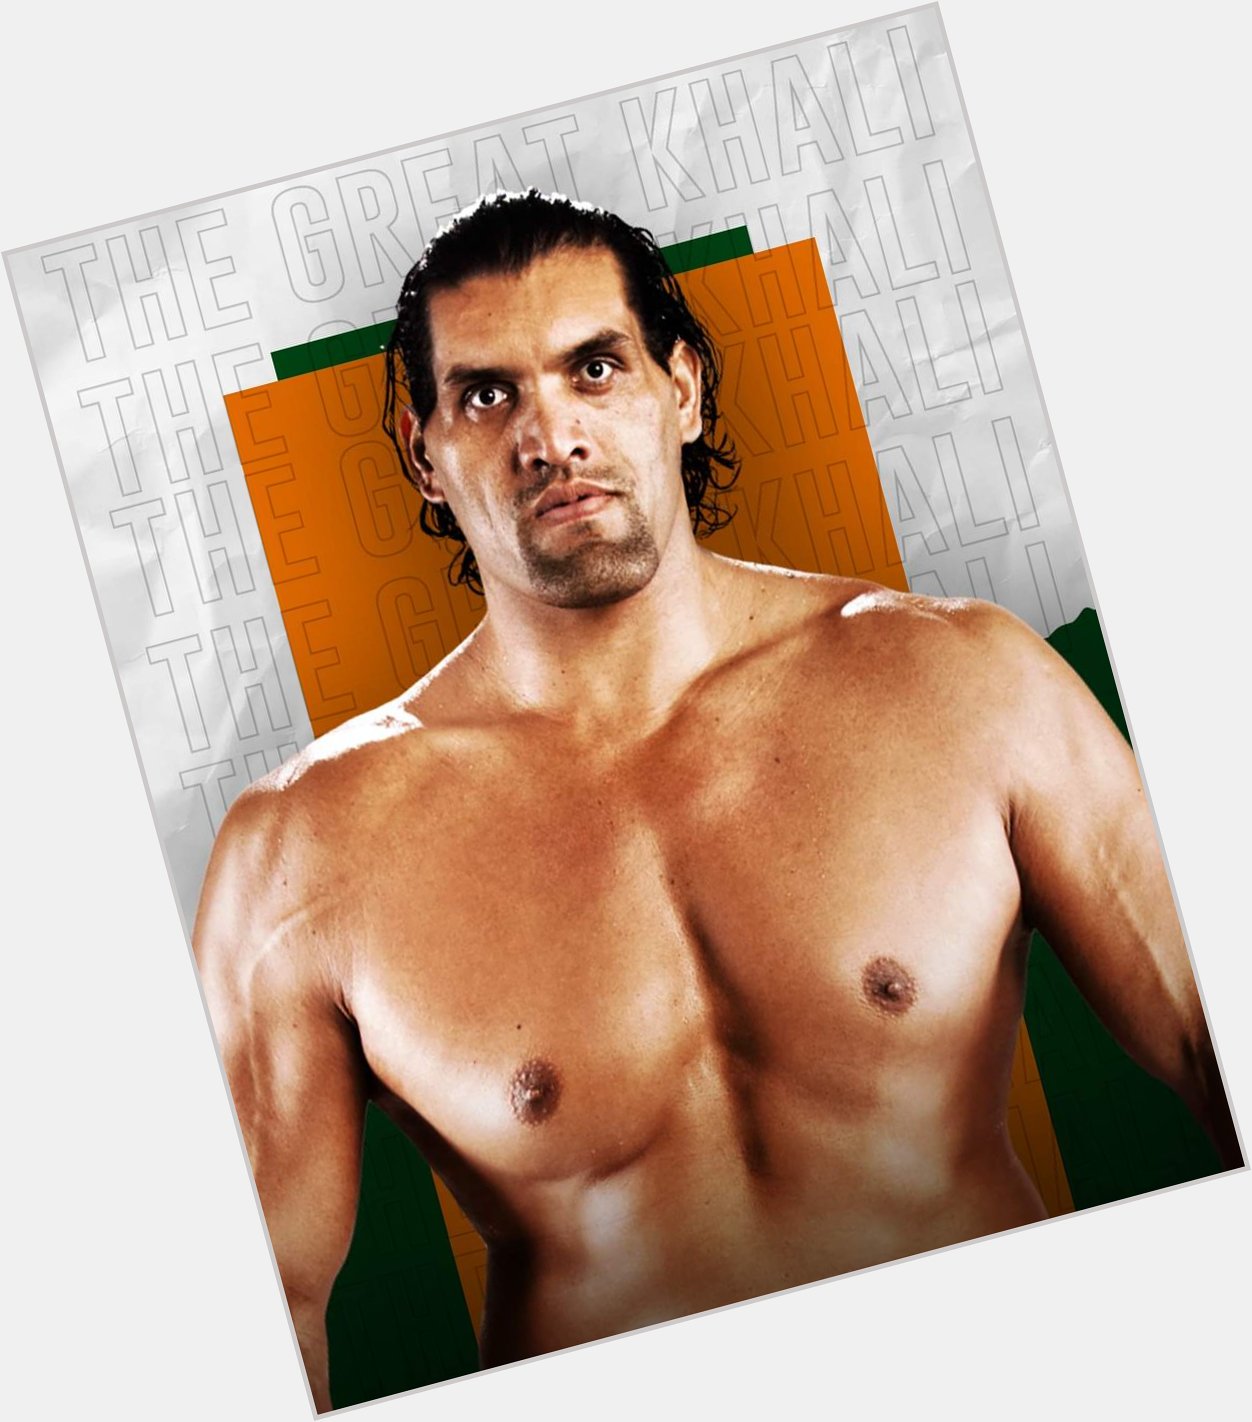 Happy Birthday to WWE Hall of Famer and former World Champion, The Great Khali!  